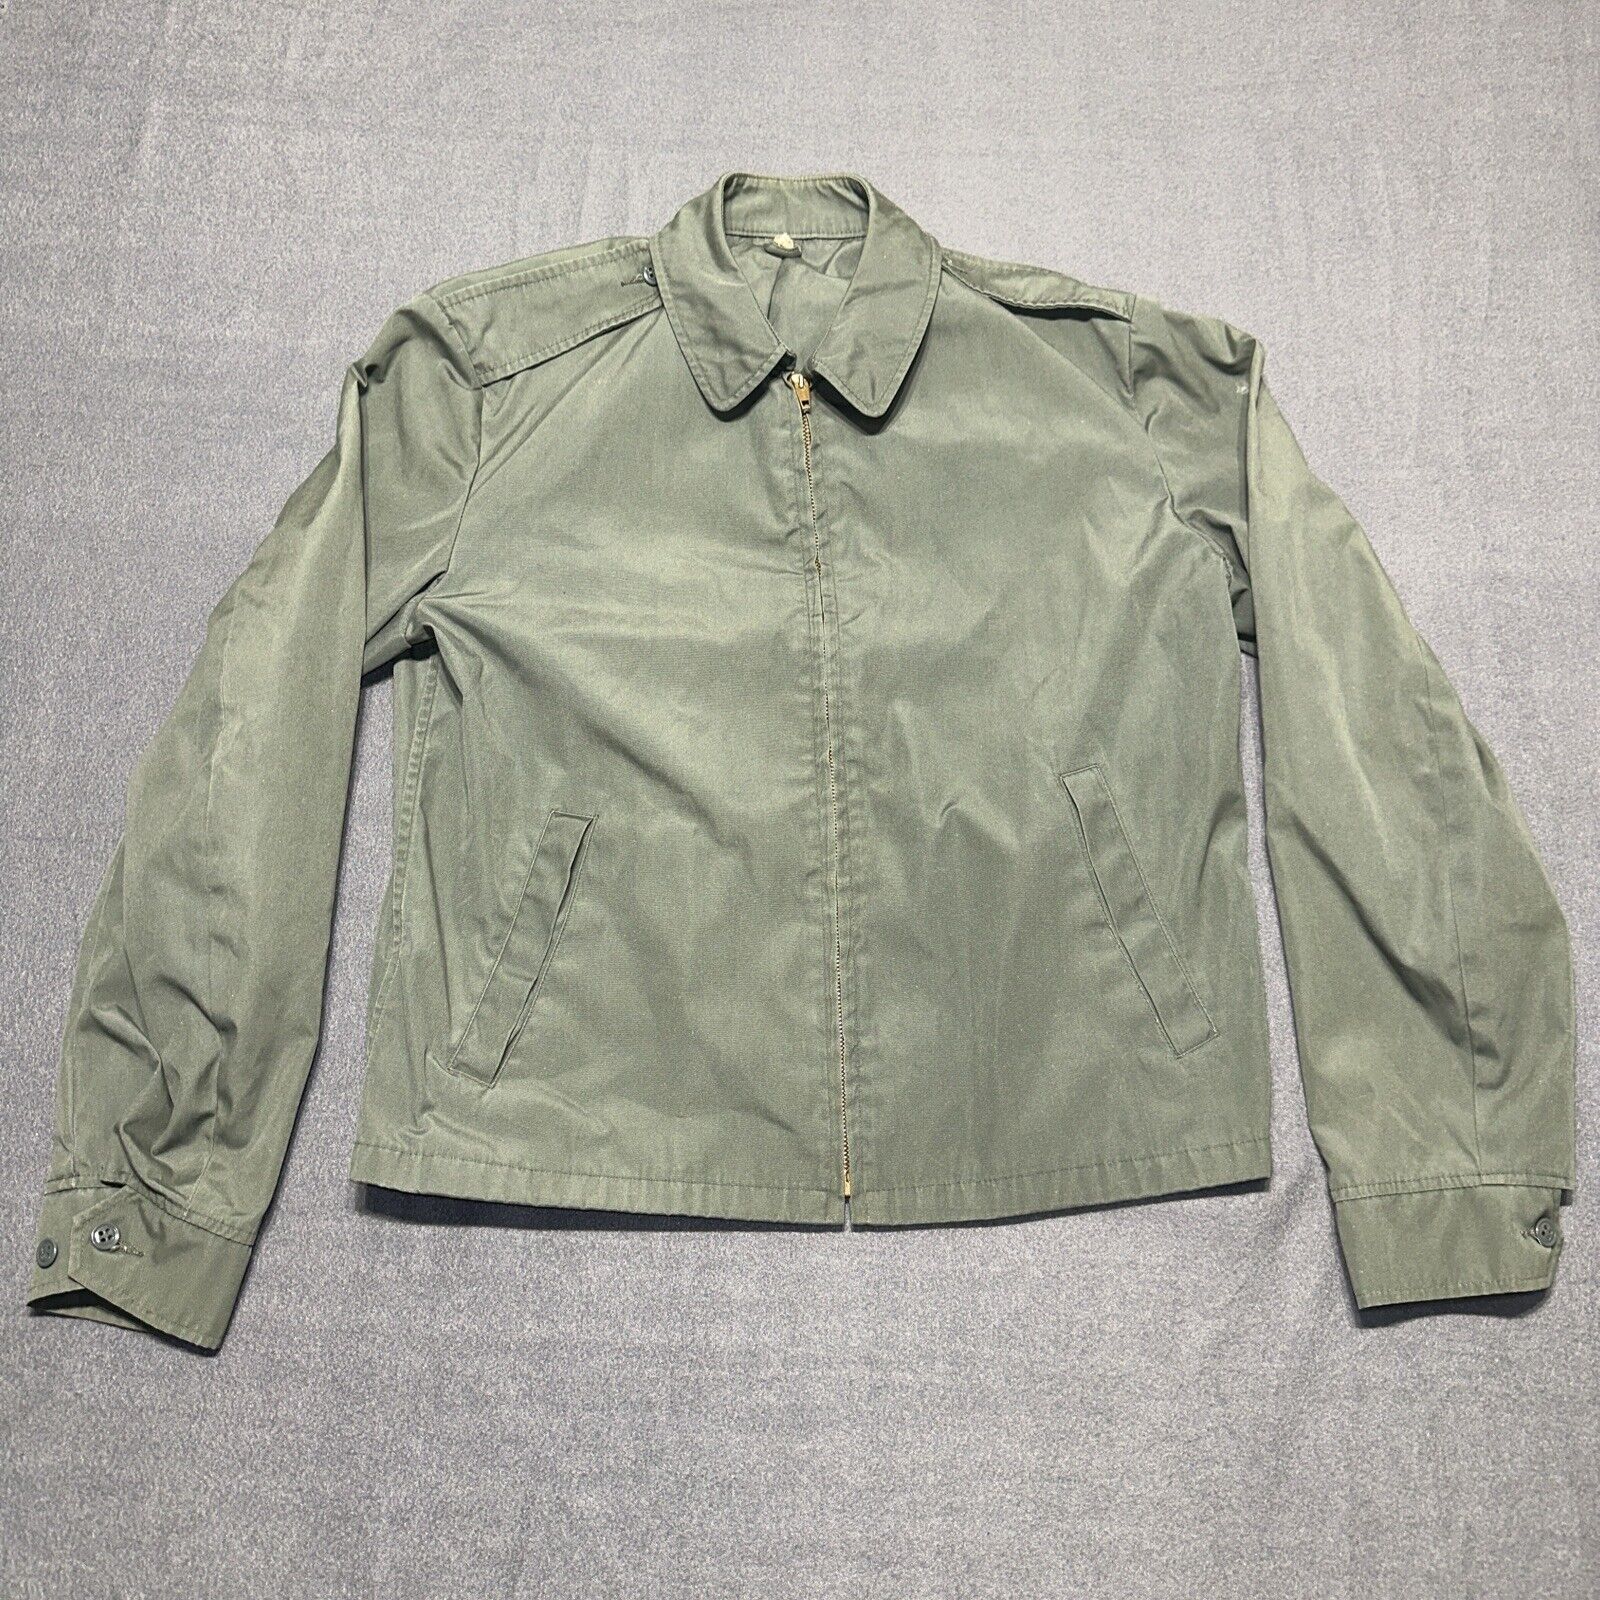 VINTAGE 70s  AG-274 MILITARY GREEN WATER REPELLENT JACKET SIZE 40 TALL